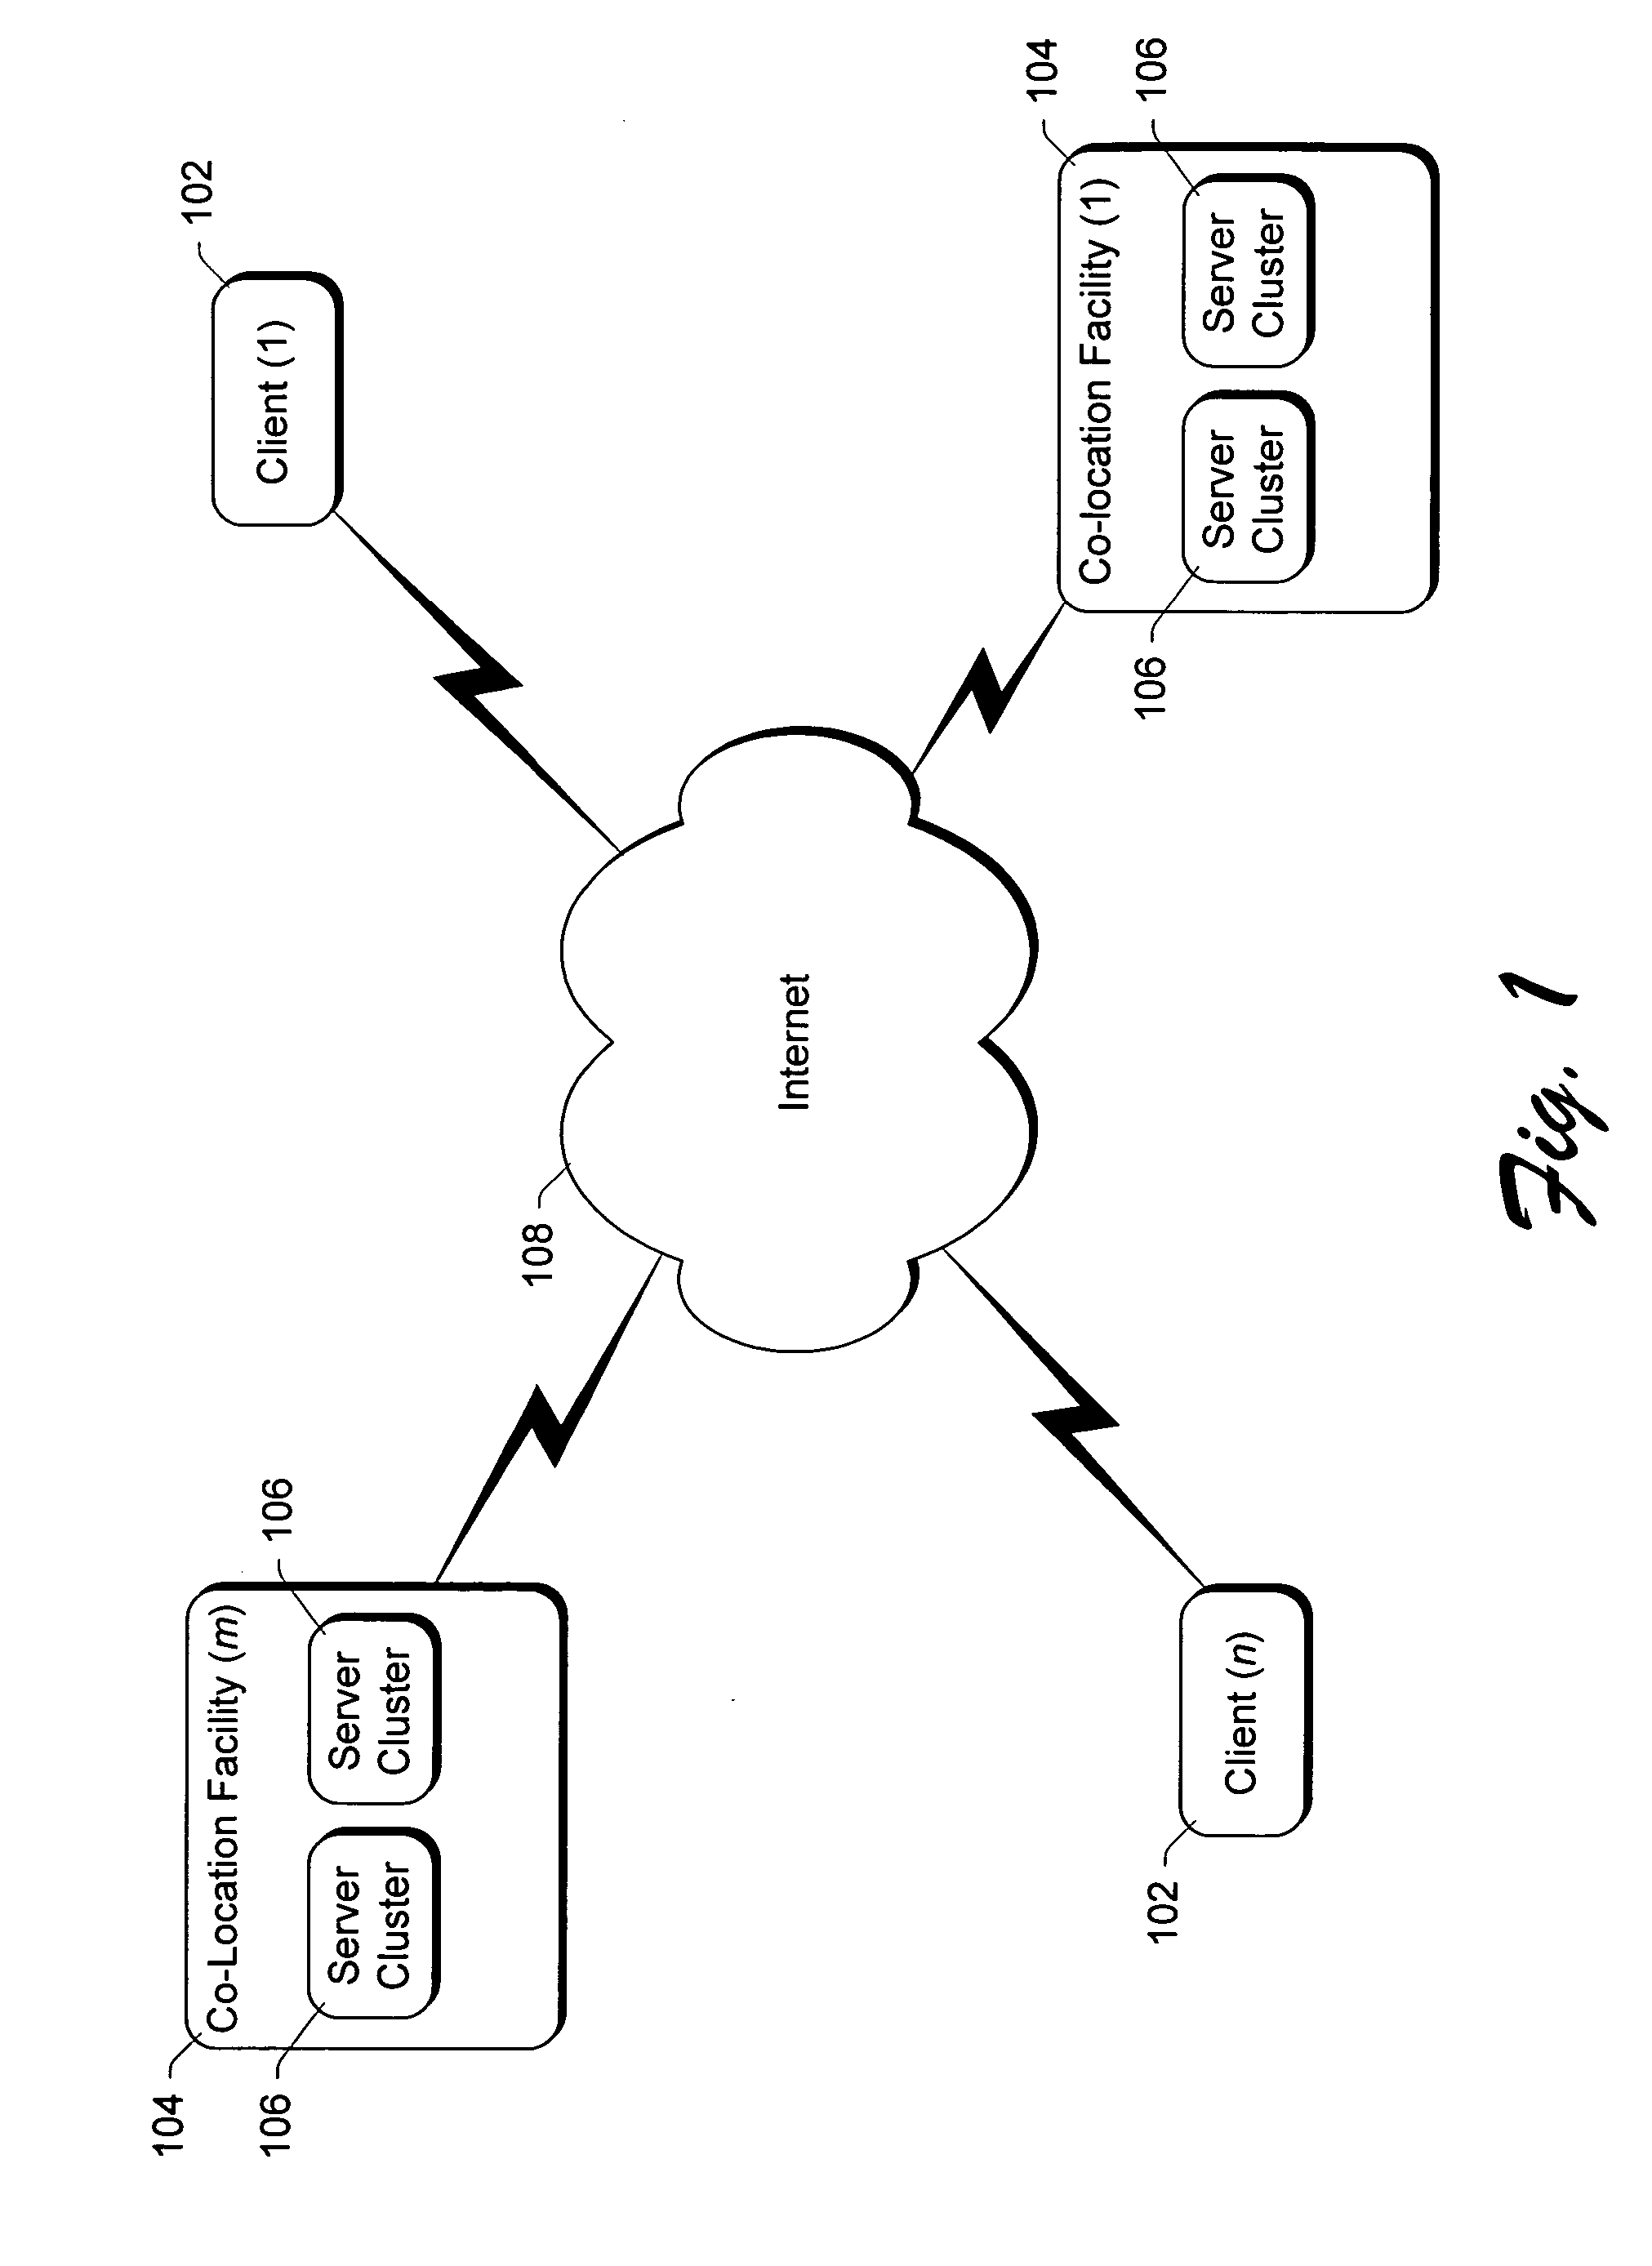 System and method for distributed management of shared computers